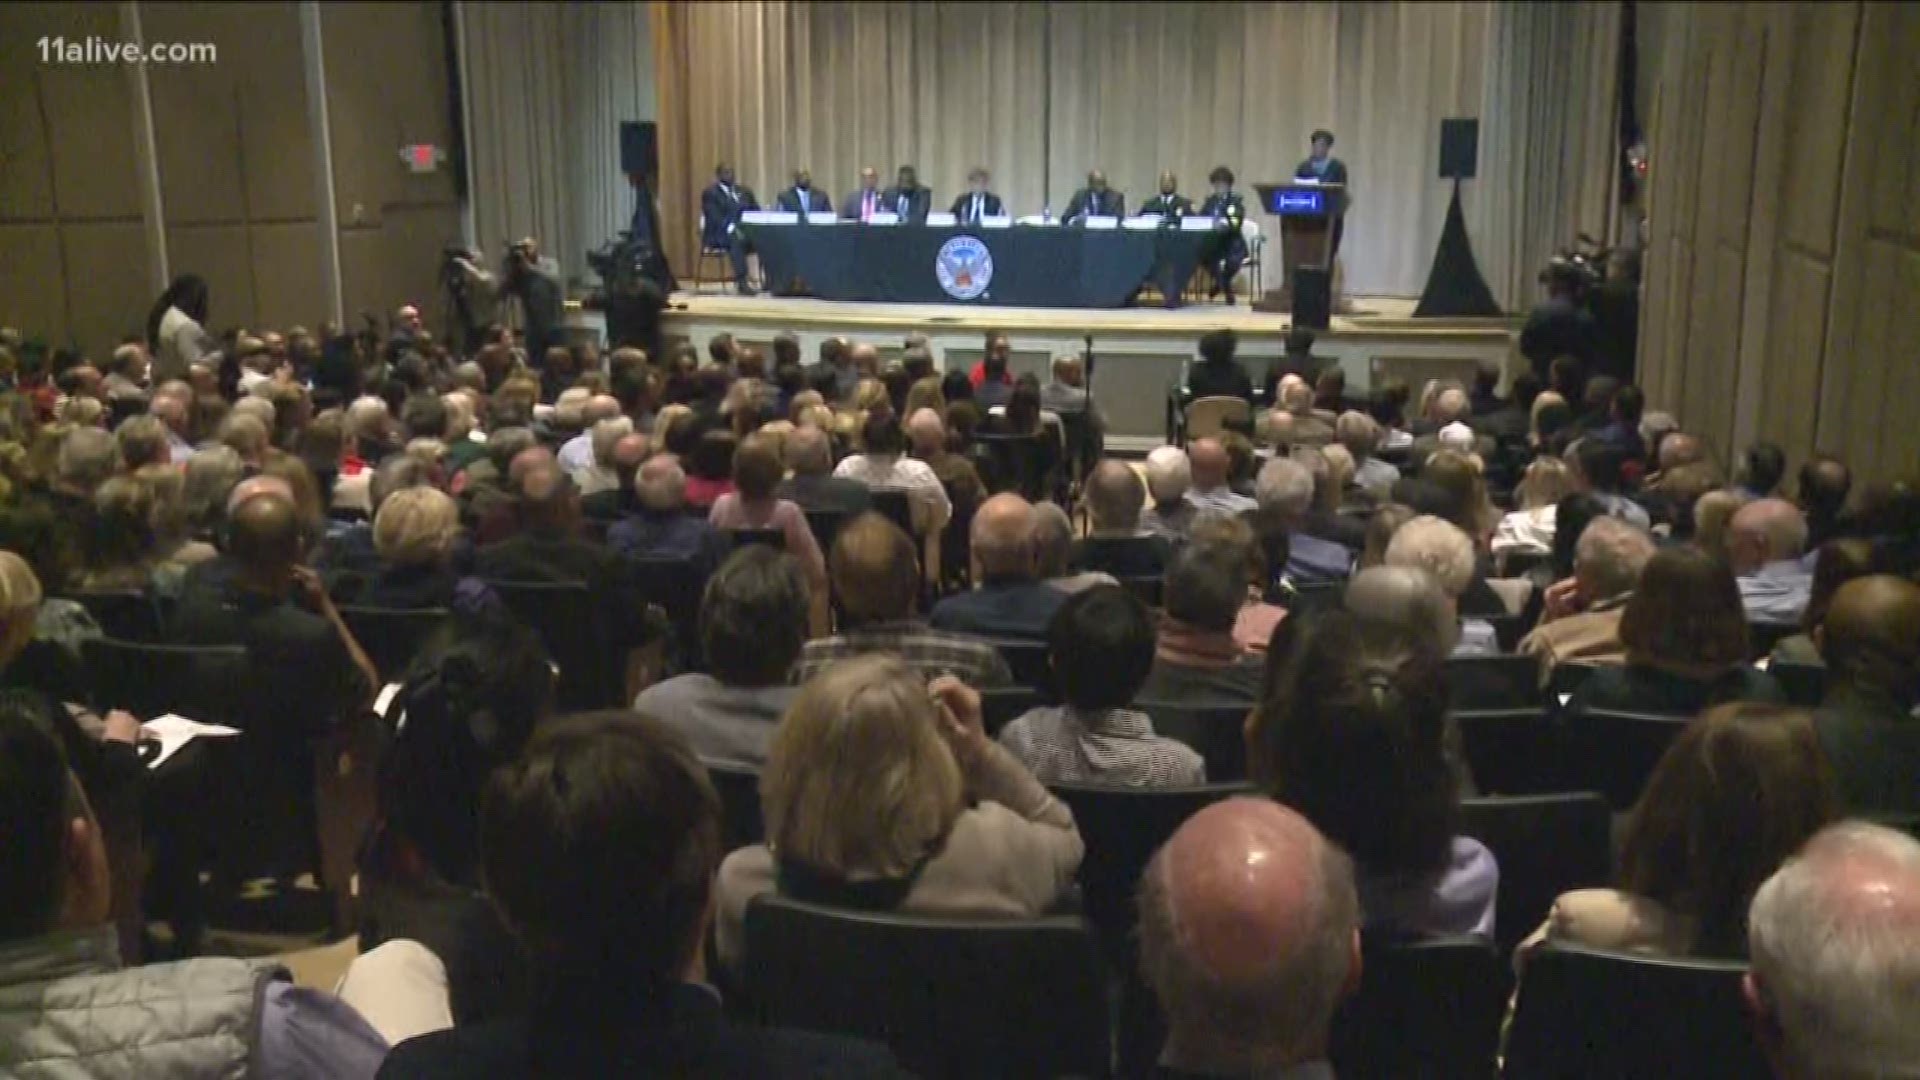 Mayor Keisha Lance Bottoms hosted her first in a series of town halls Thursday night.